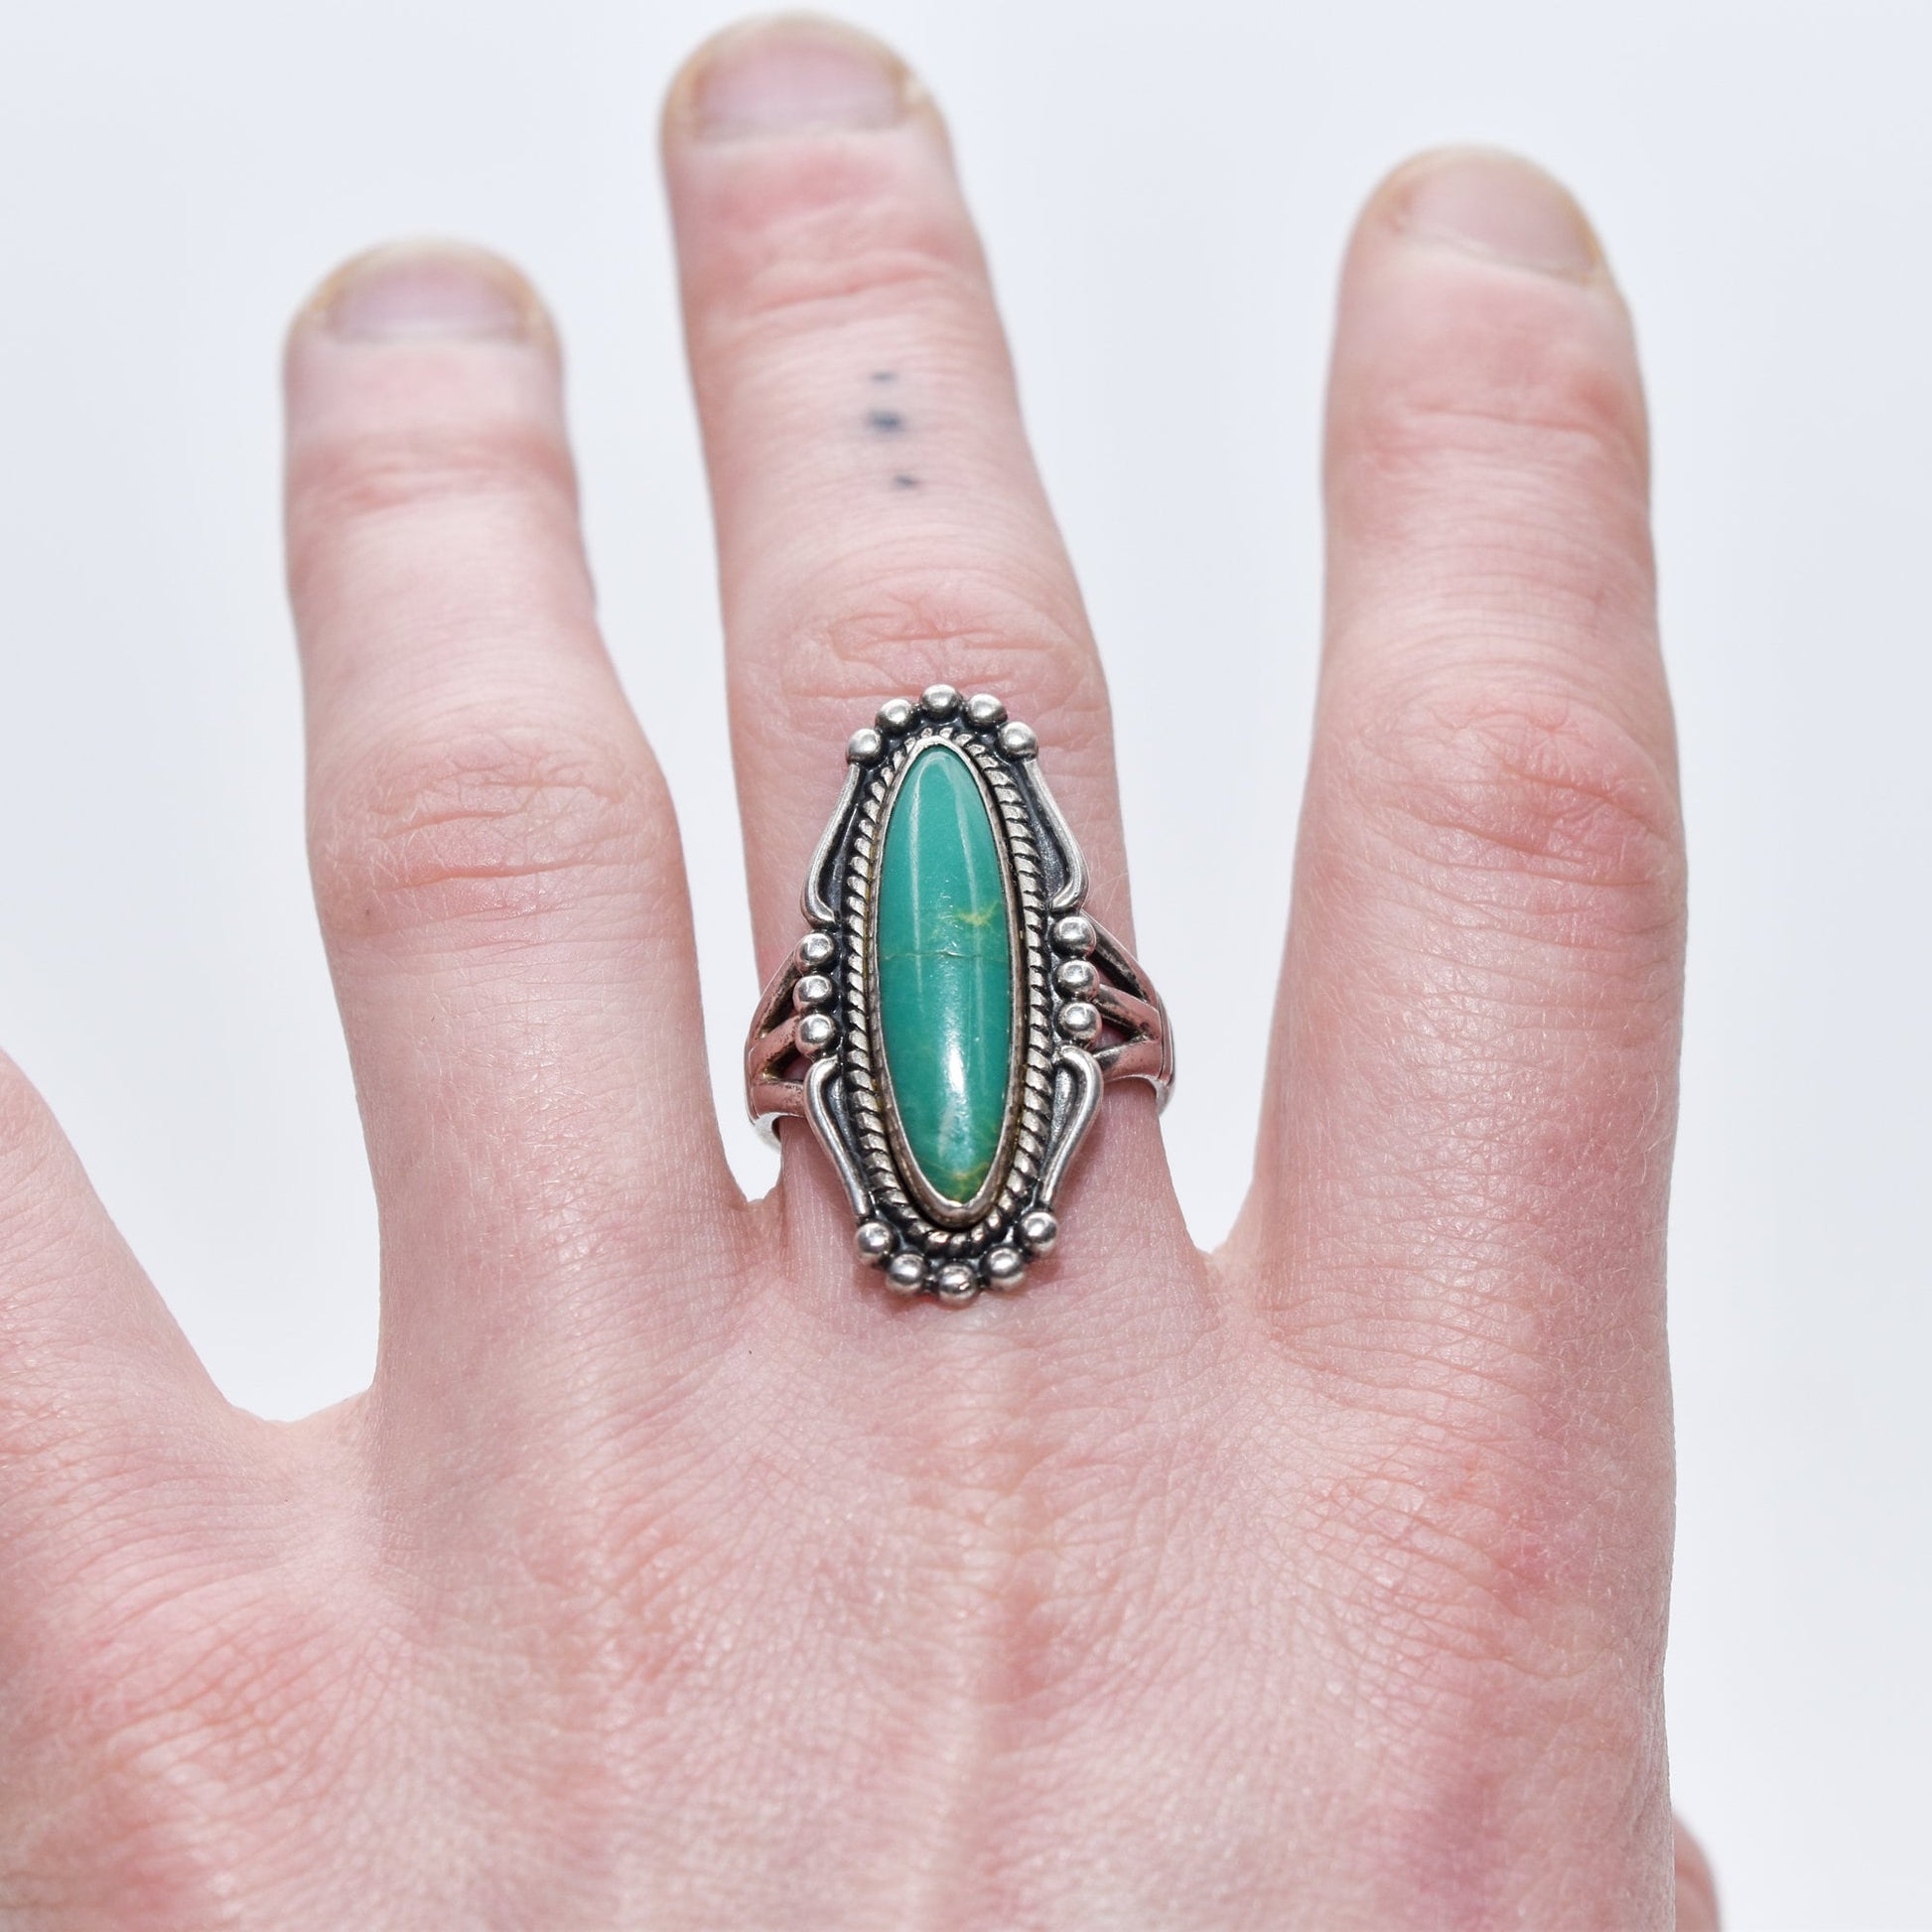 Native American sterling silver turquoise marquise ring showcased on a finger, size 8 US, with Southwestern jewelry design details.